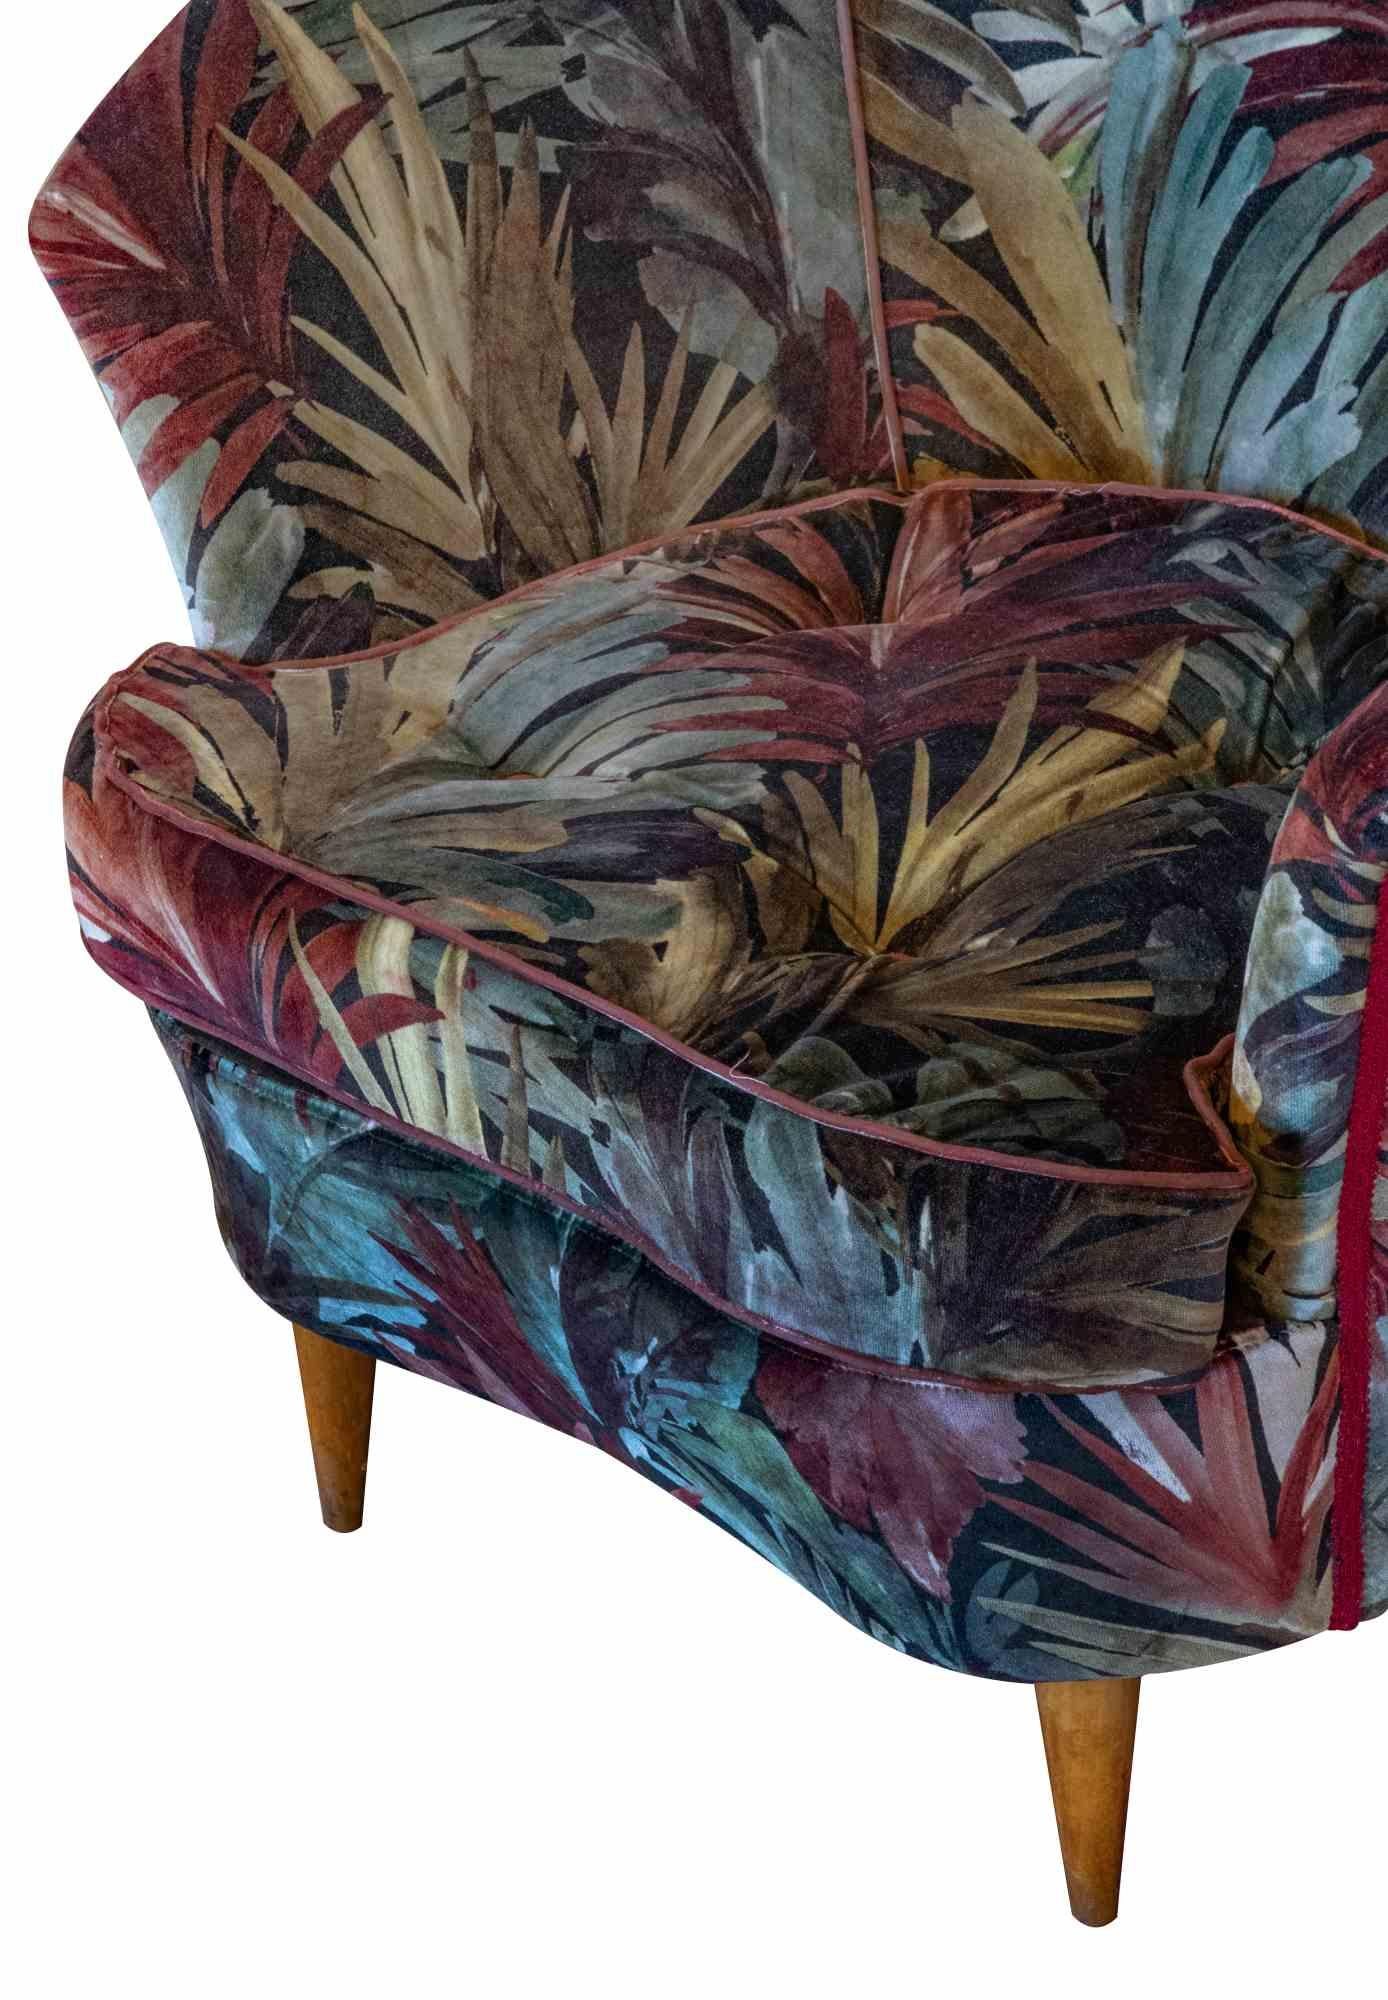 Pair of Vitange armchairs is an original design furniture item realized in the 1950s.

A couple of velvet armachair decorated with a jungle motif.

Perfect to give a vintage touch to your room!